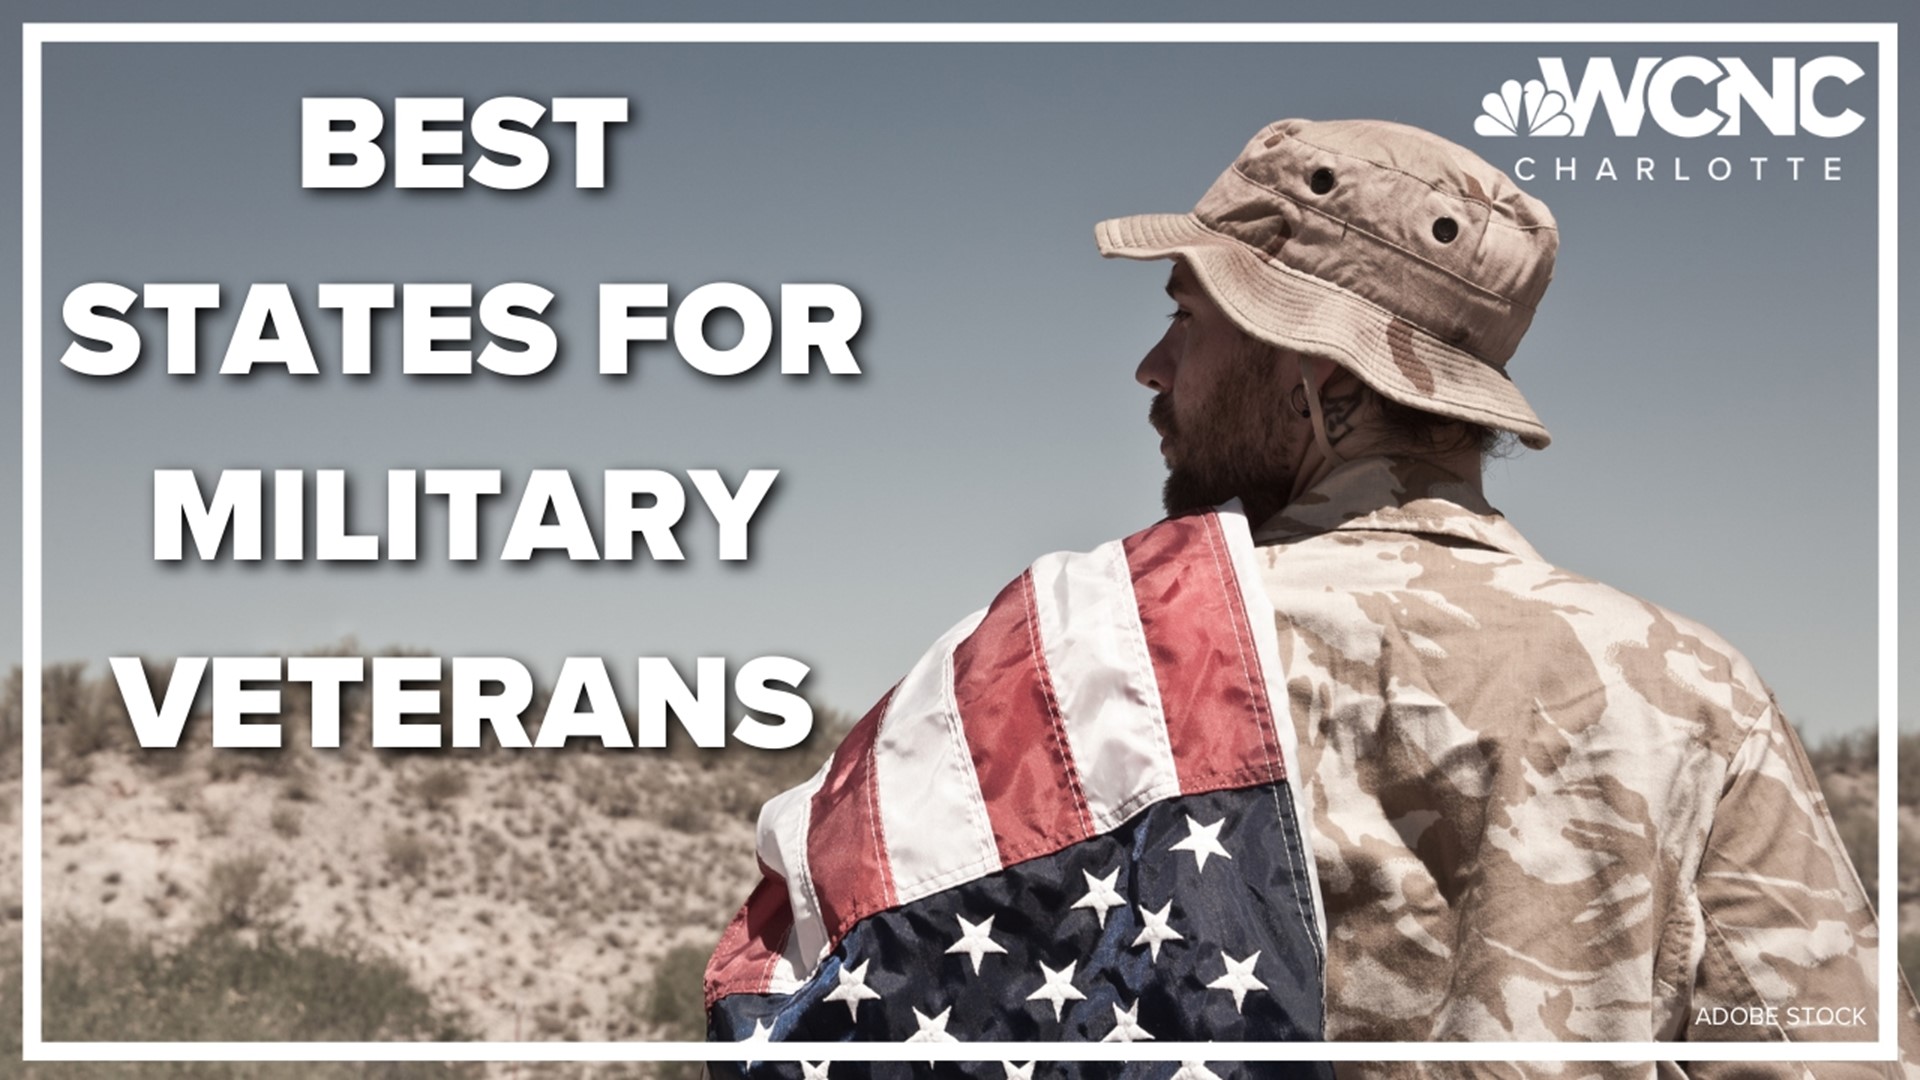 The Carolinas are one of the best states to live in if you're a military retiree.